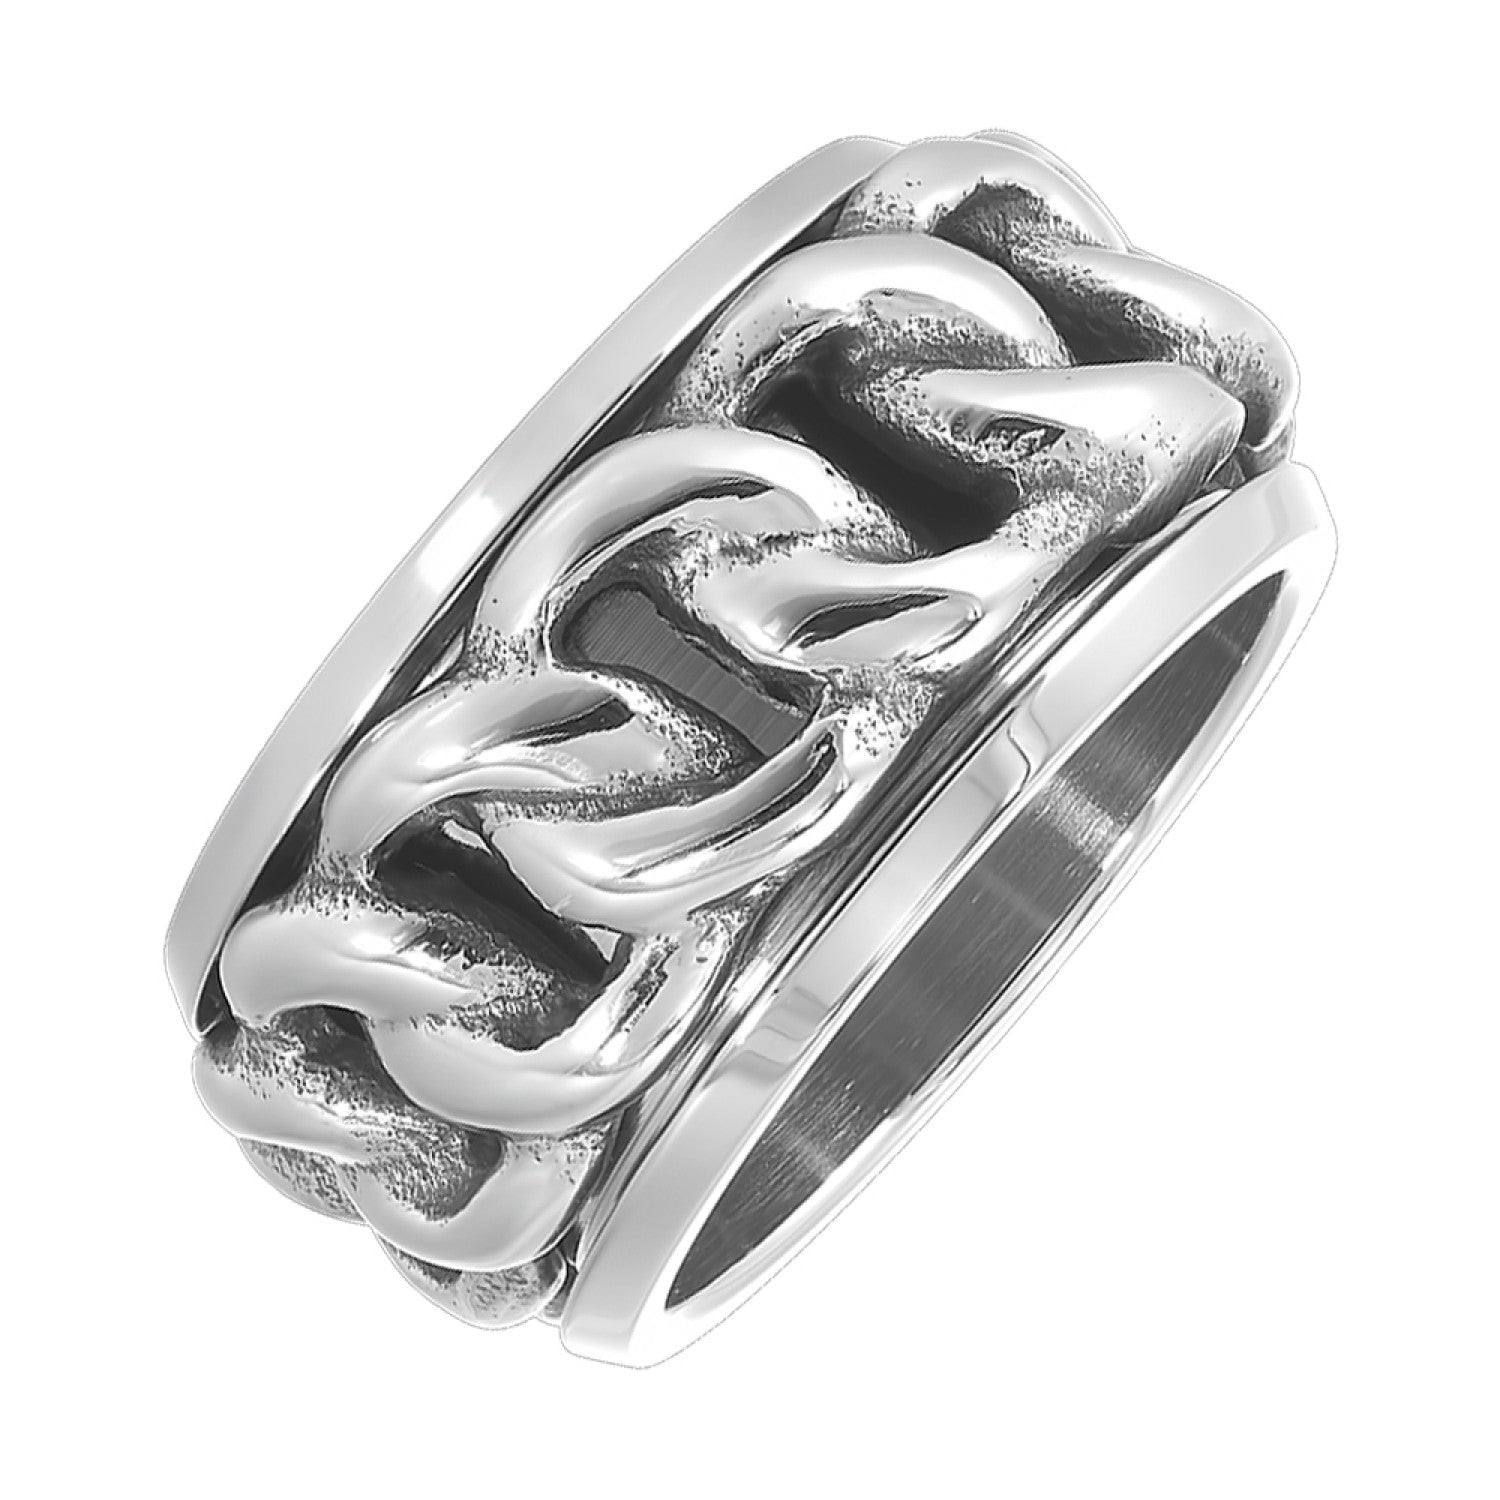 Stainless Steel Men's Chain Link Fashion Ring